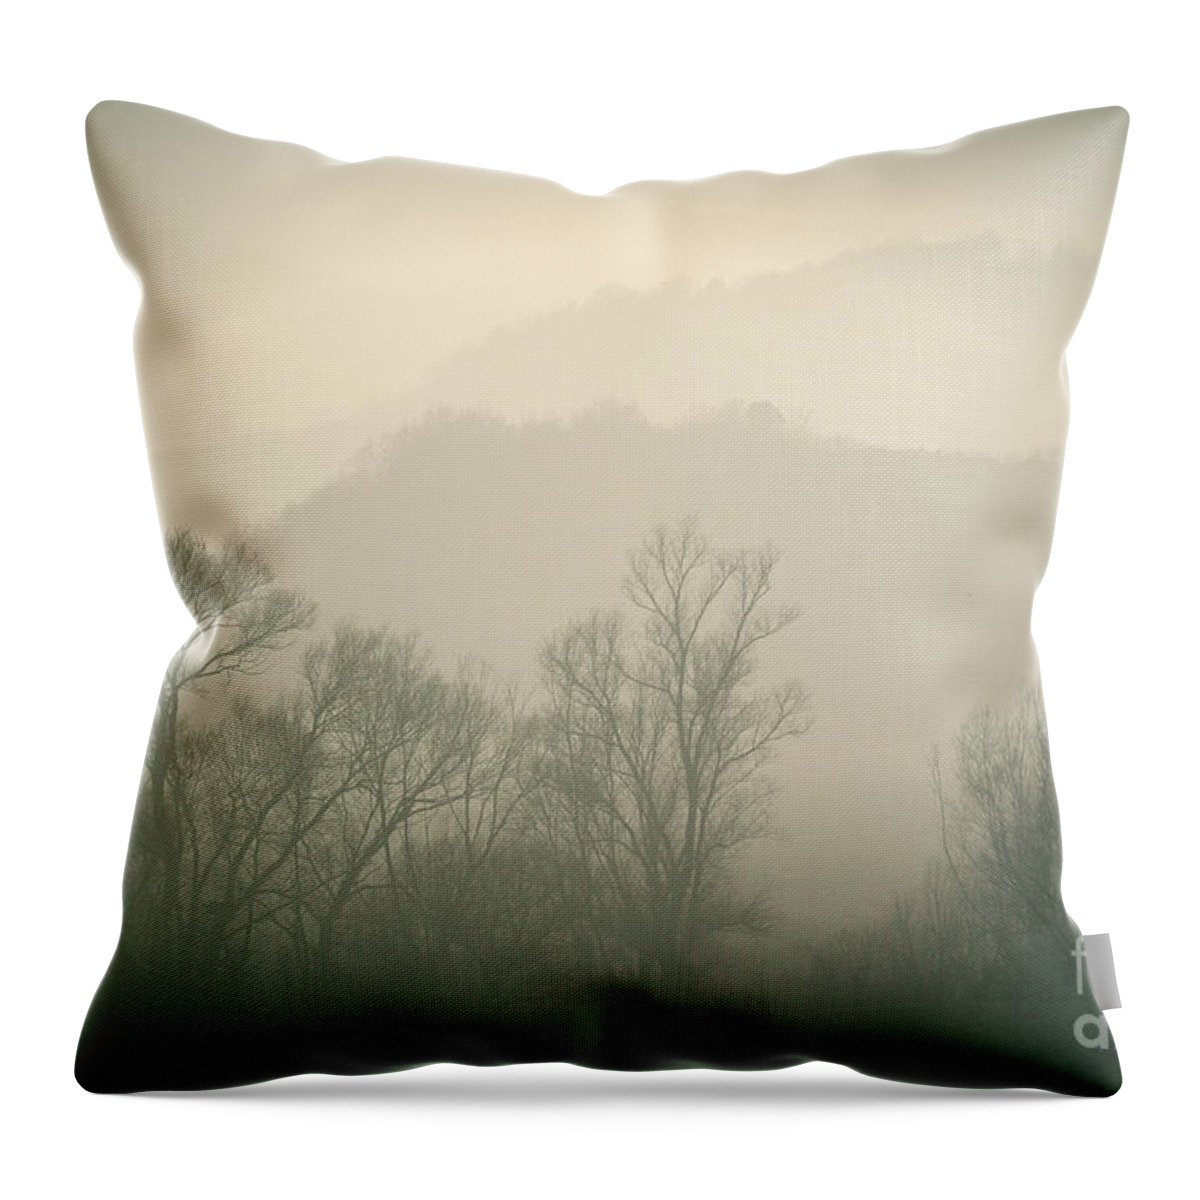 Landscape Throw Pillow featuring the photograph Autumn Morning by Dimitar Hristov